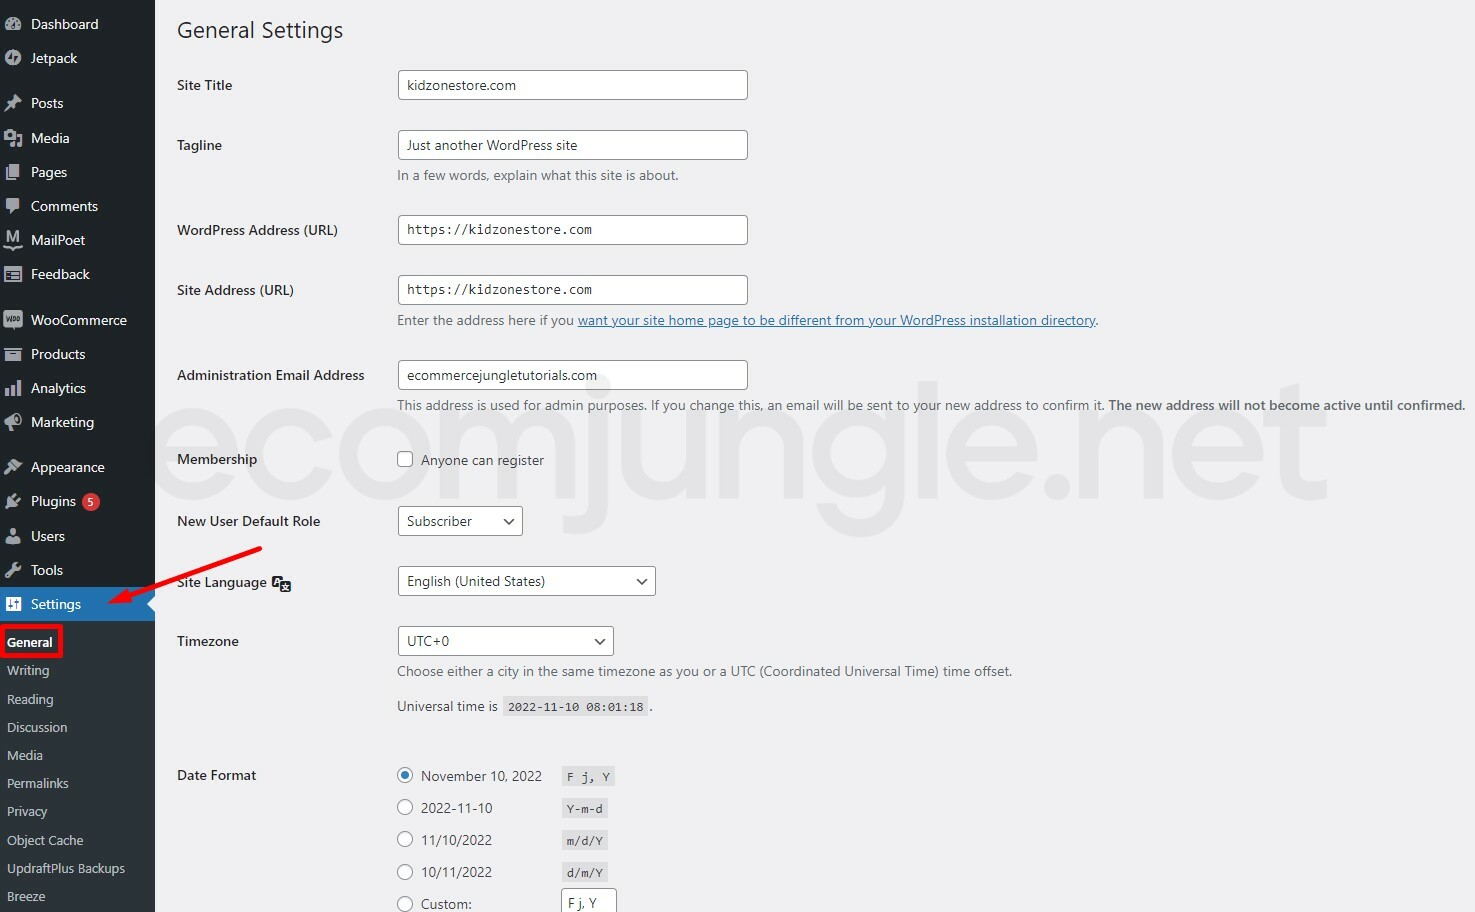 General Settings – You can change your Site Title, Tagline, Administrator Address, Timezone, Date Format, and more